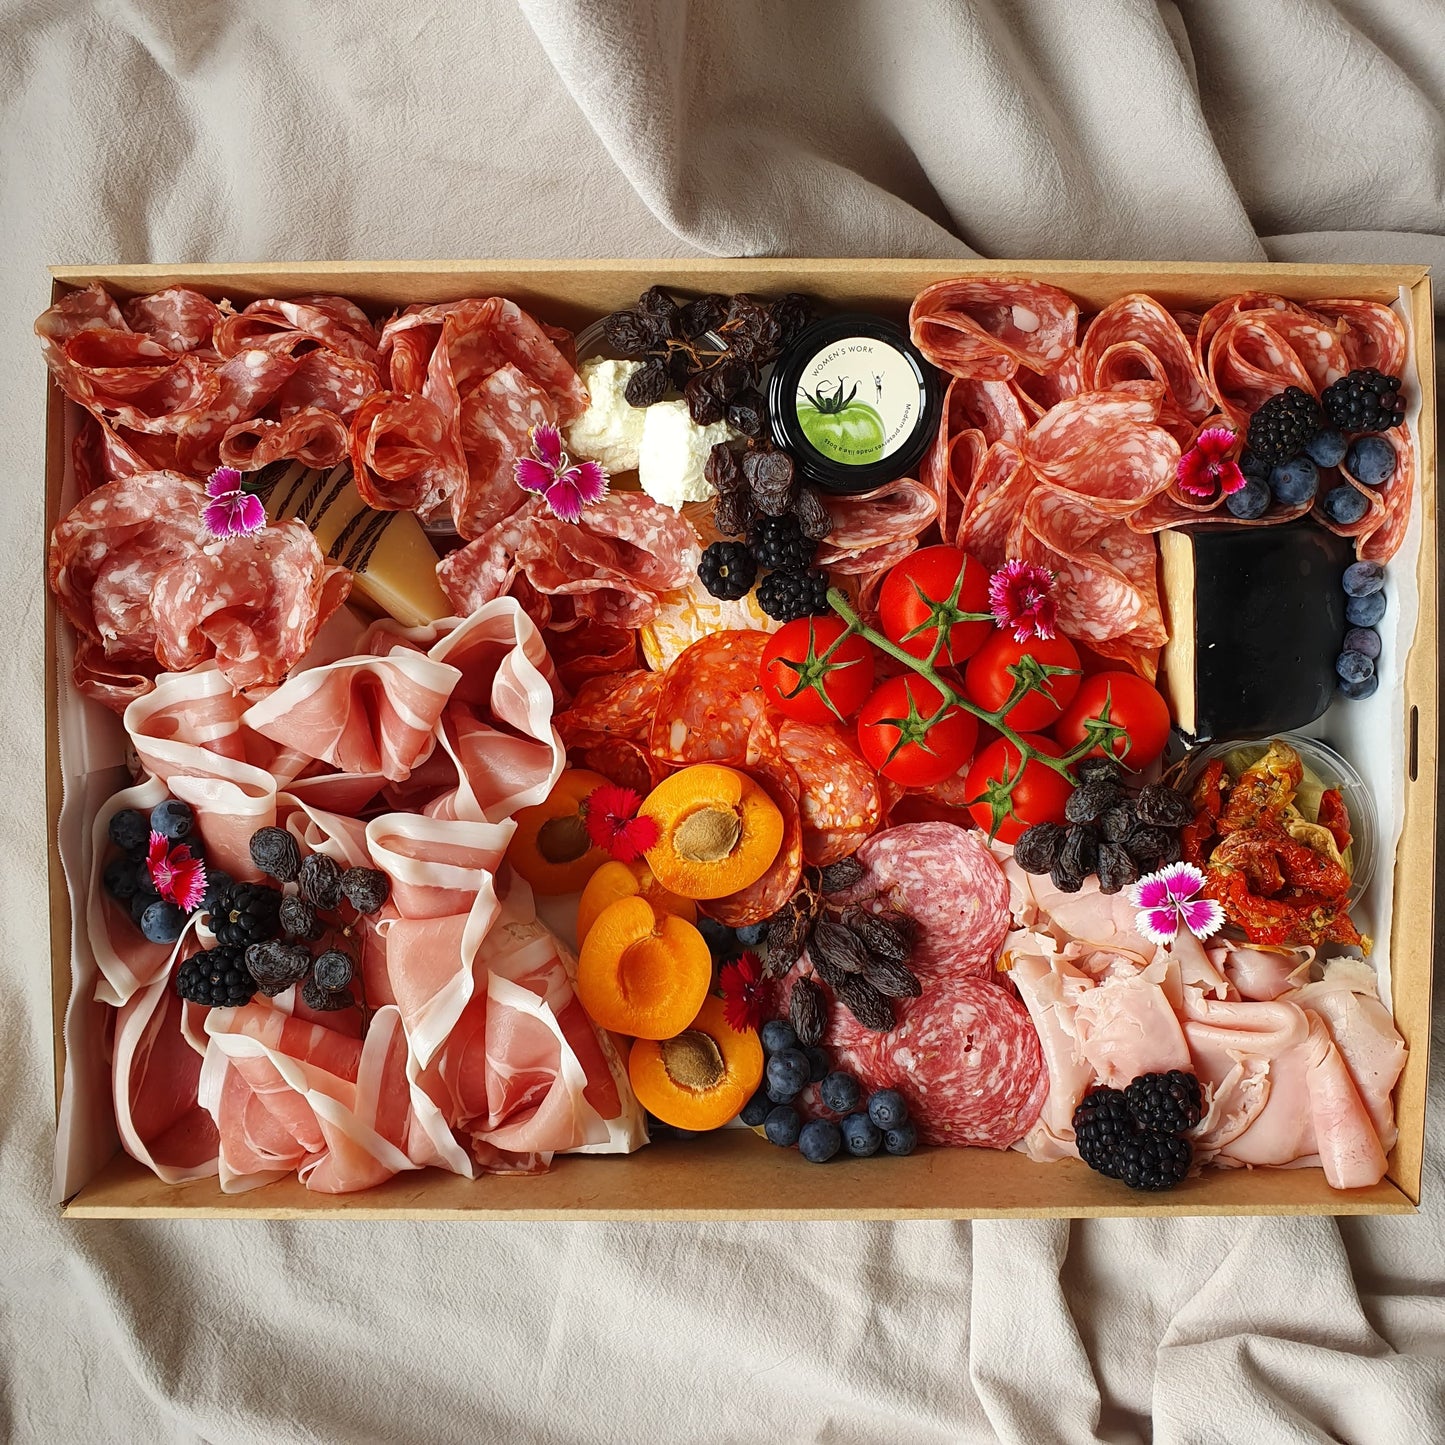 Large Events Package: Cheese & Charcuterie Grazing - Serves 10-12